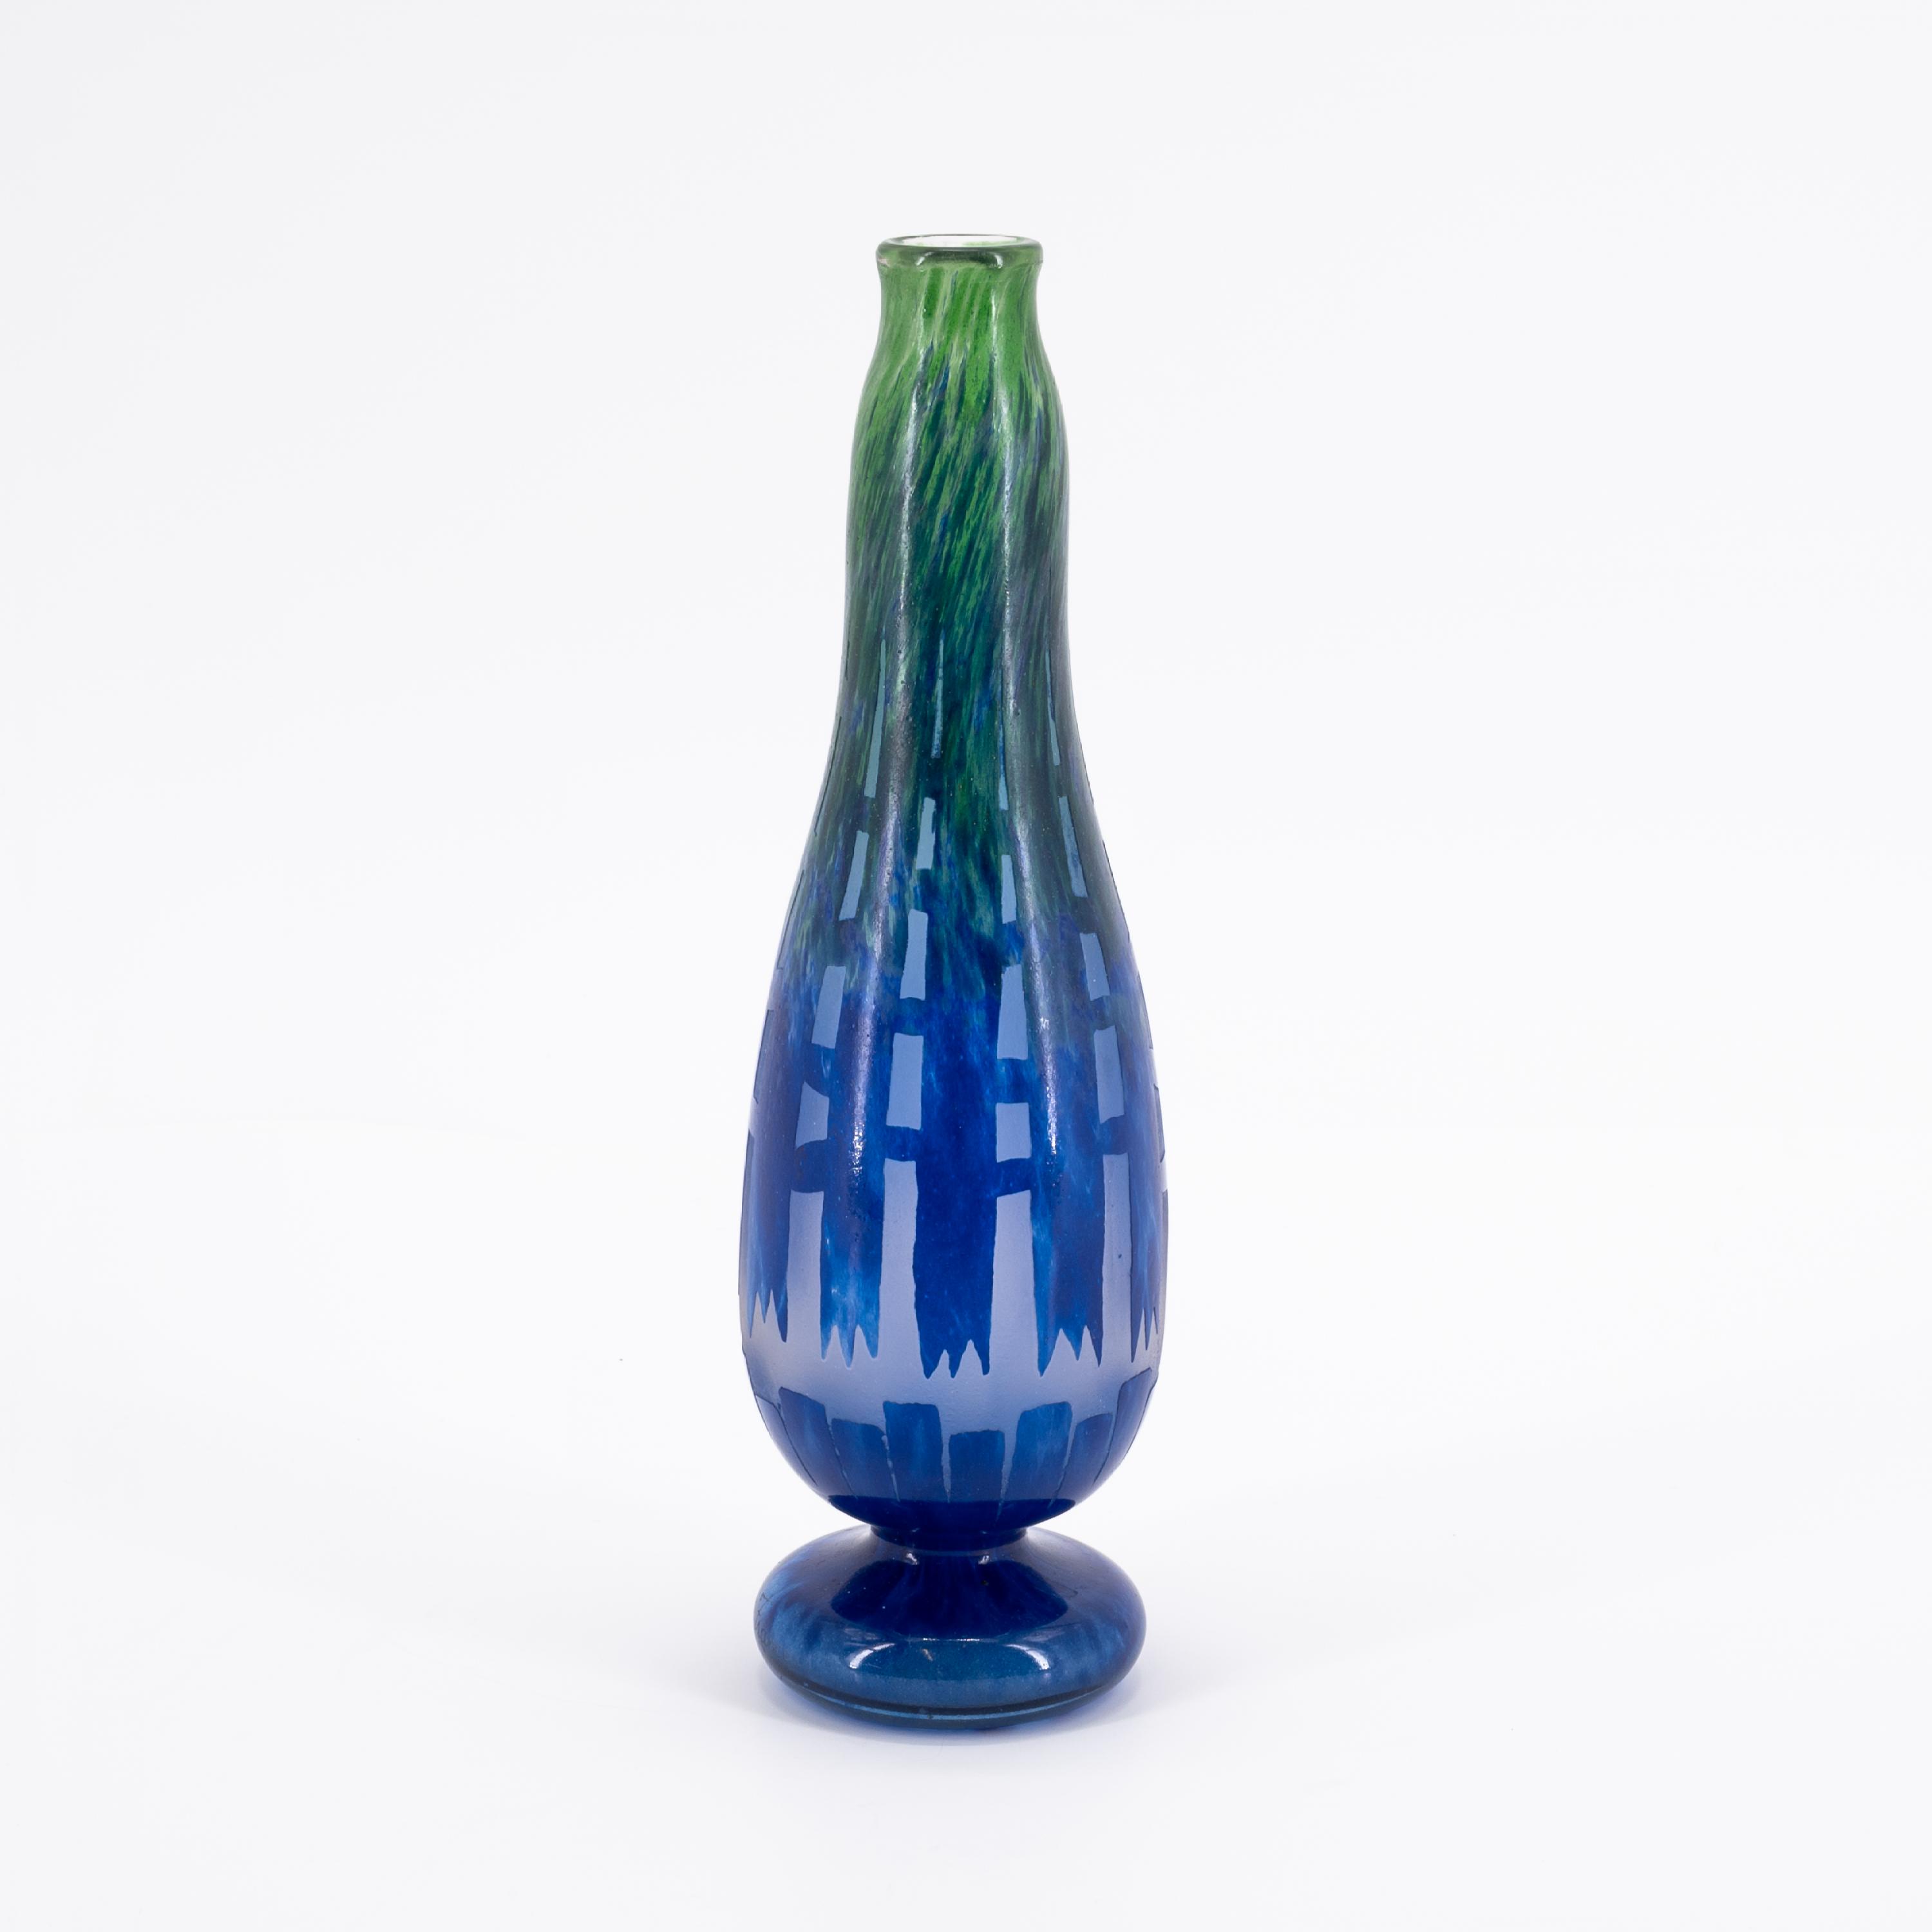 GLASS SOLIFLOR VASE WITH DECOR "CHICORÉES" - Image 4 of 6